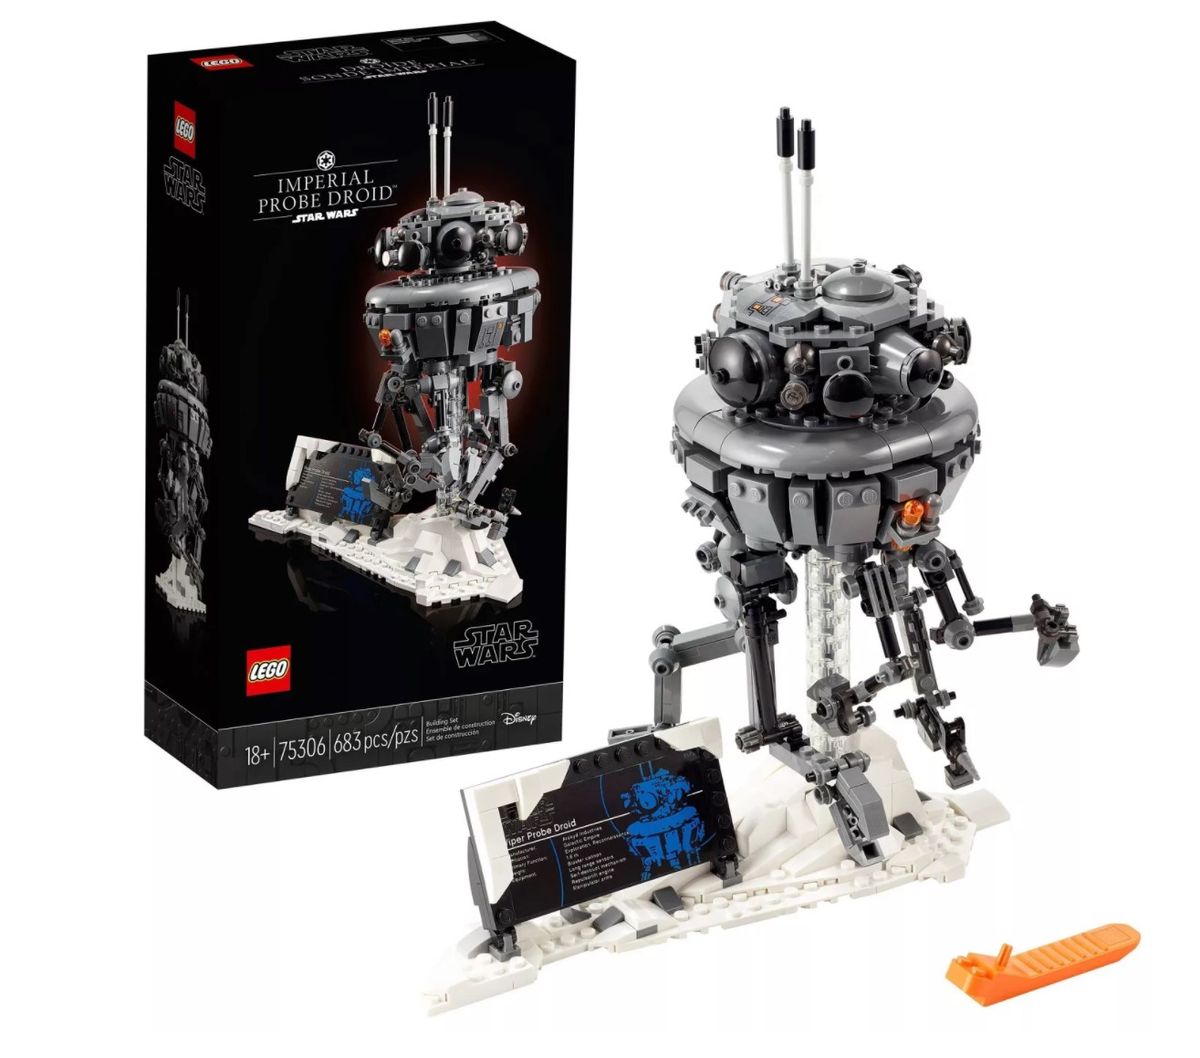 Best Buy's flash sale has great deals on these Star Wars Lego and The Mandalorian toys